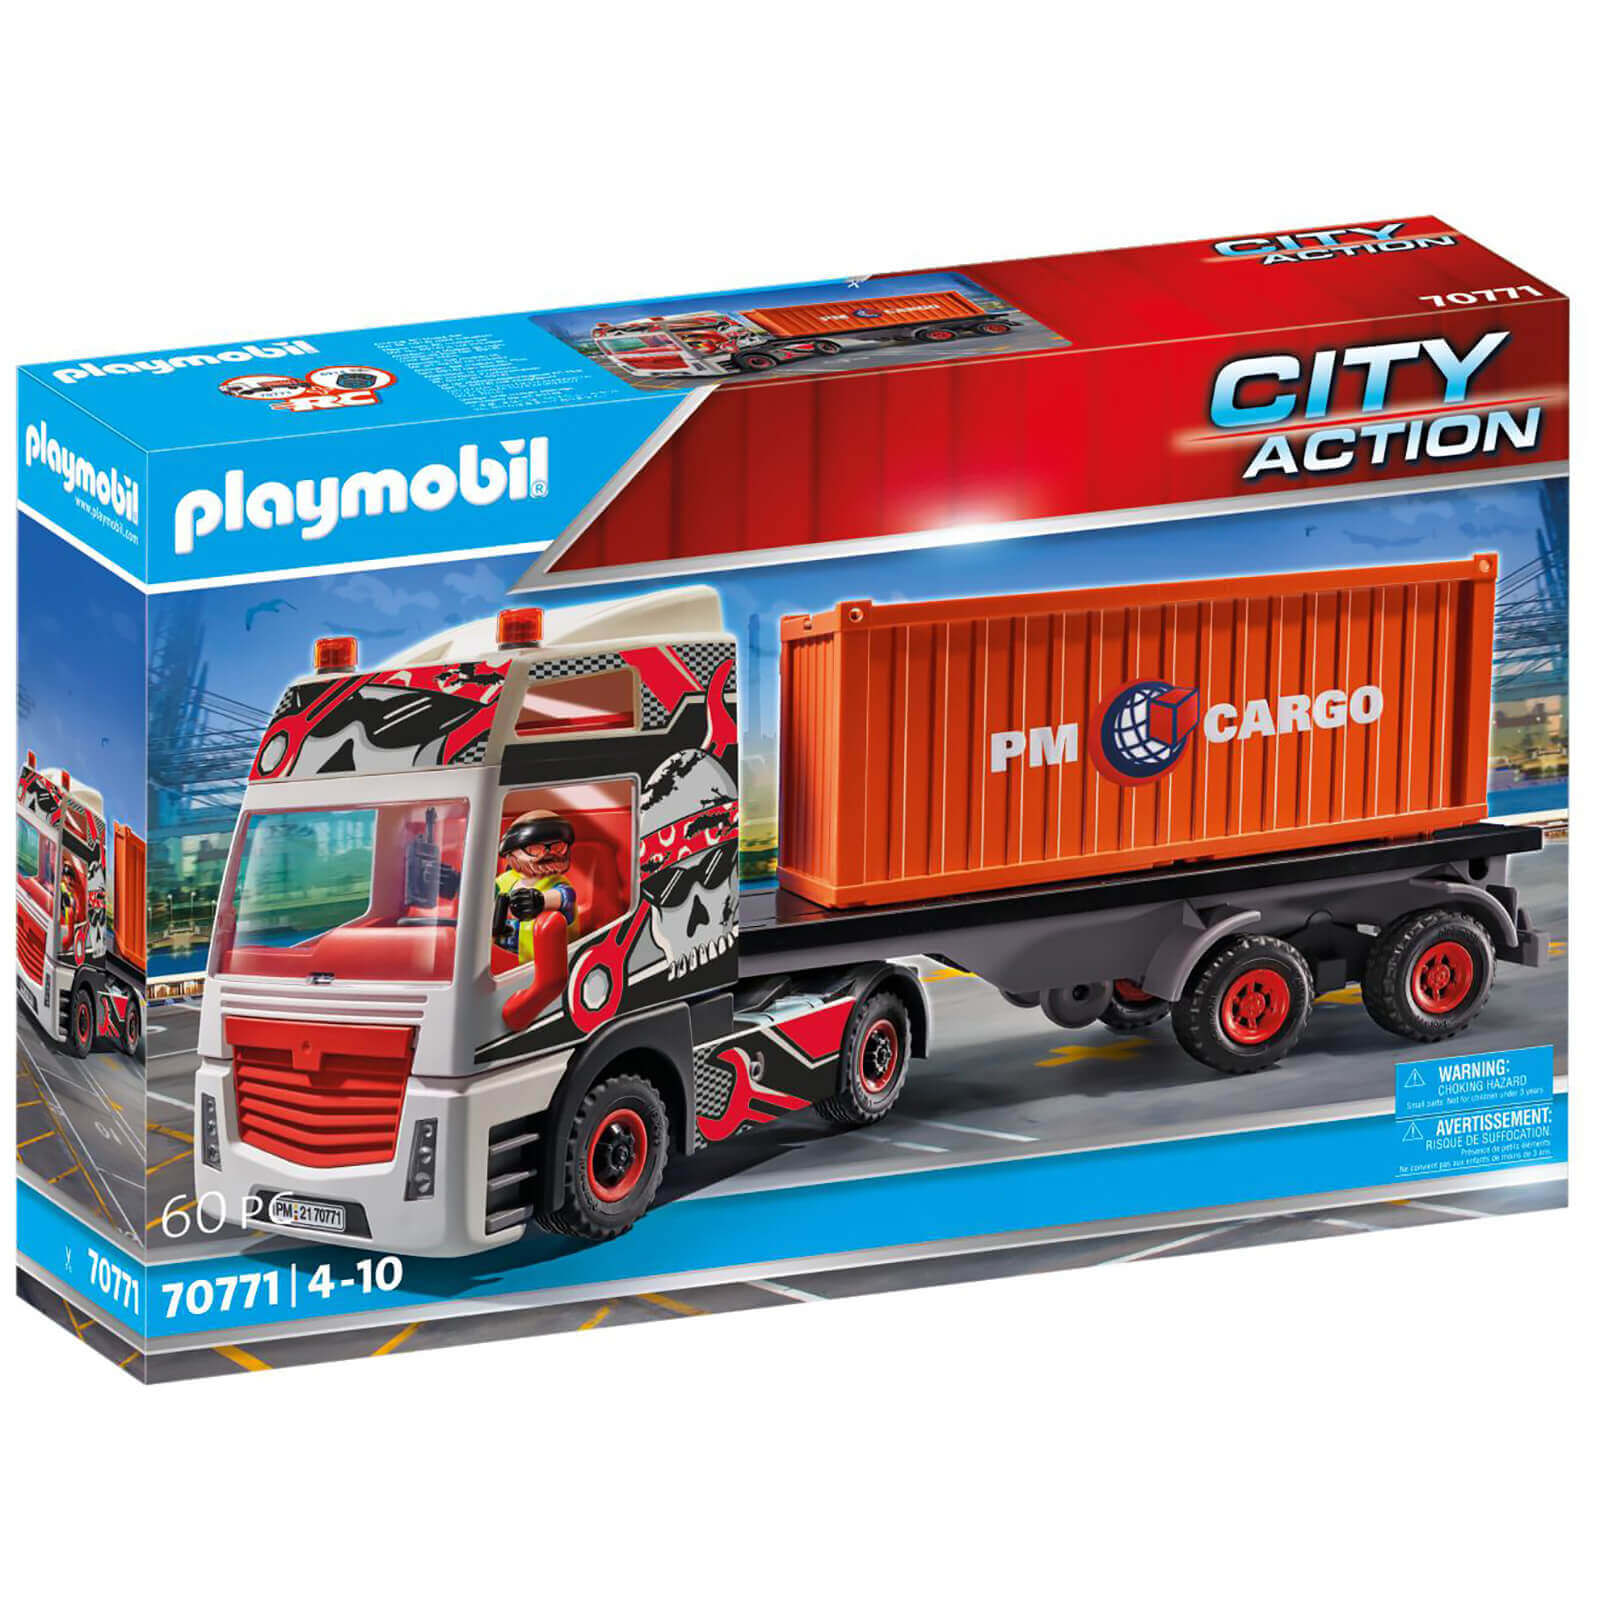 Playmobil Truck with Cargo Container (70771)